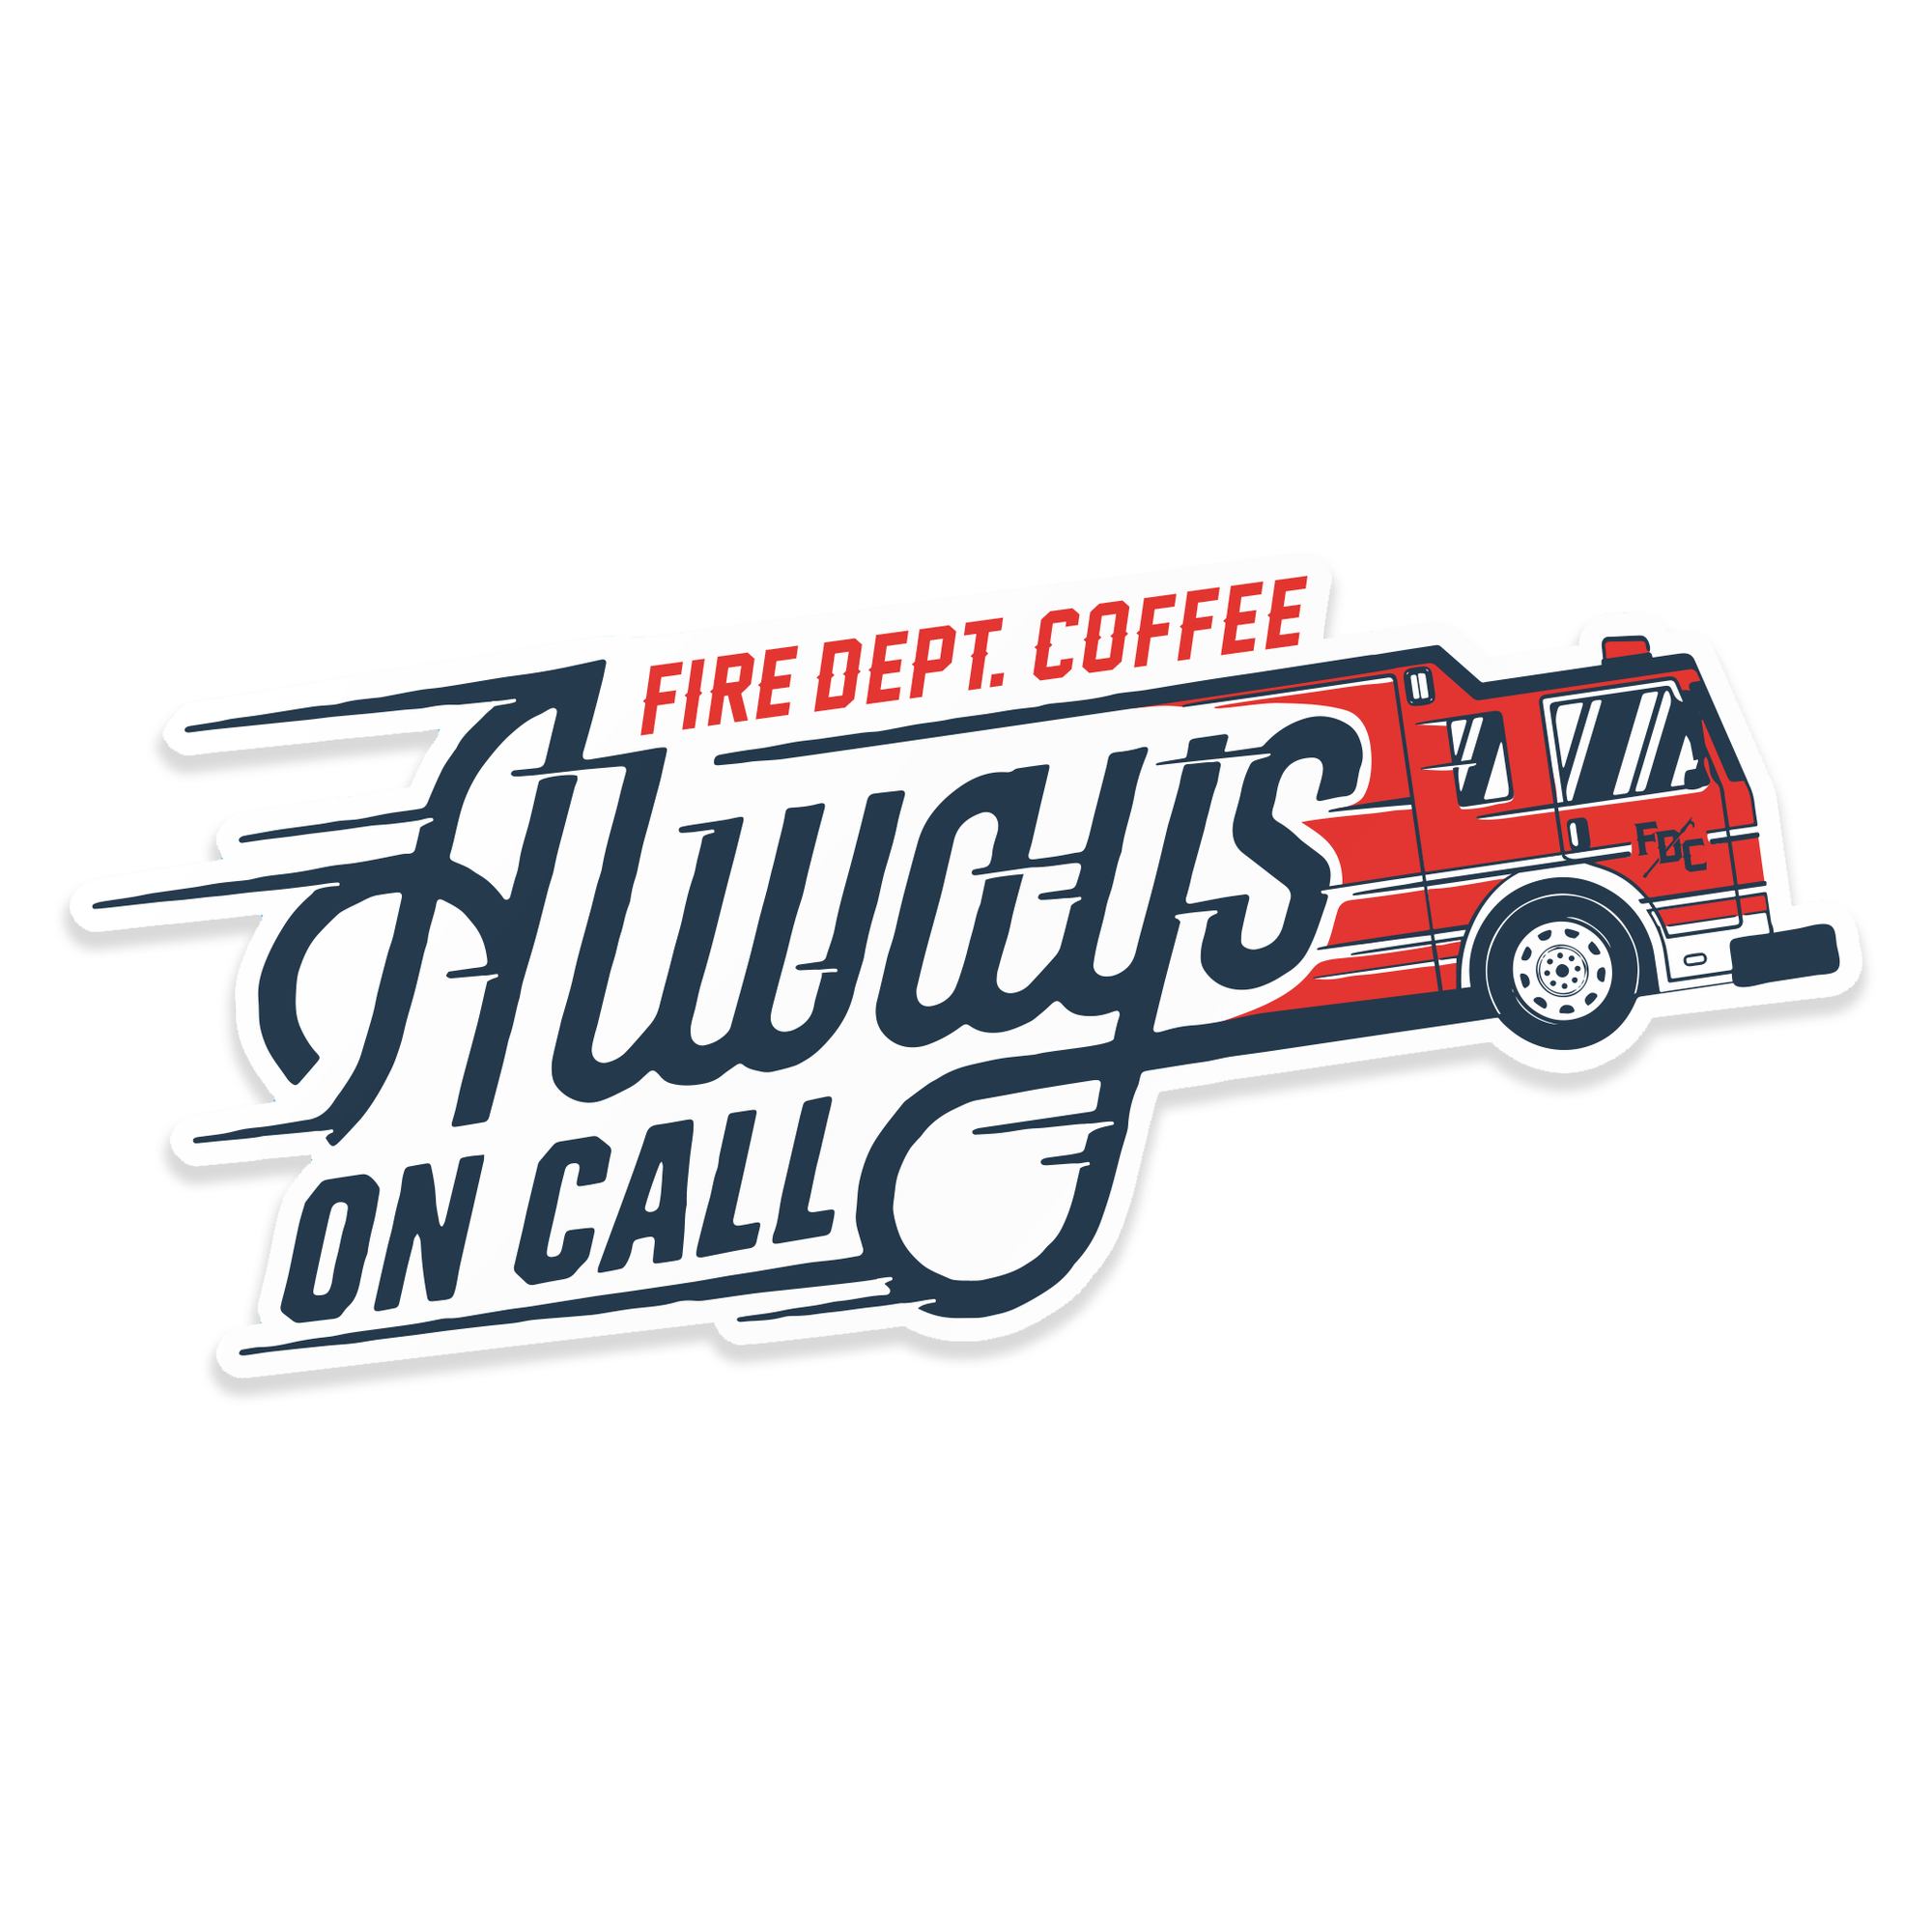 A sticker of a fire truck rushing towards a job with the text "Fire Dept. Coffee Always On Call" written over it